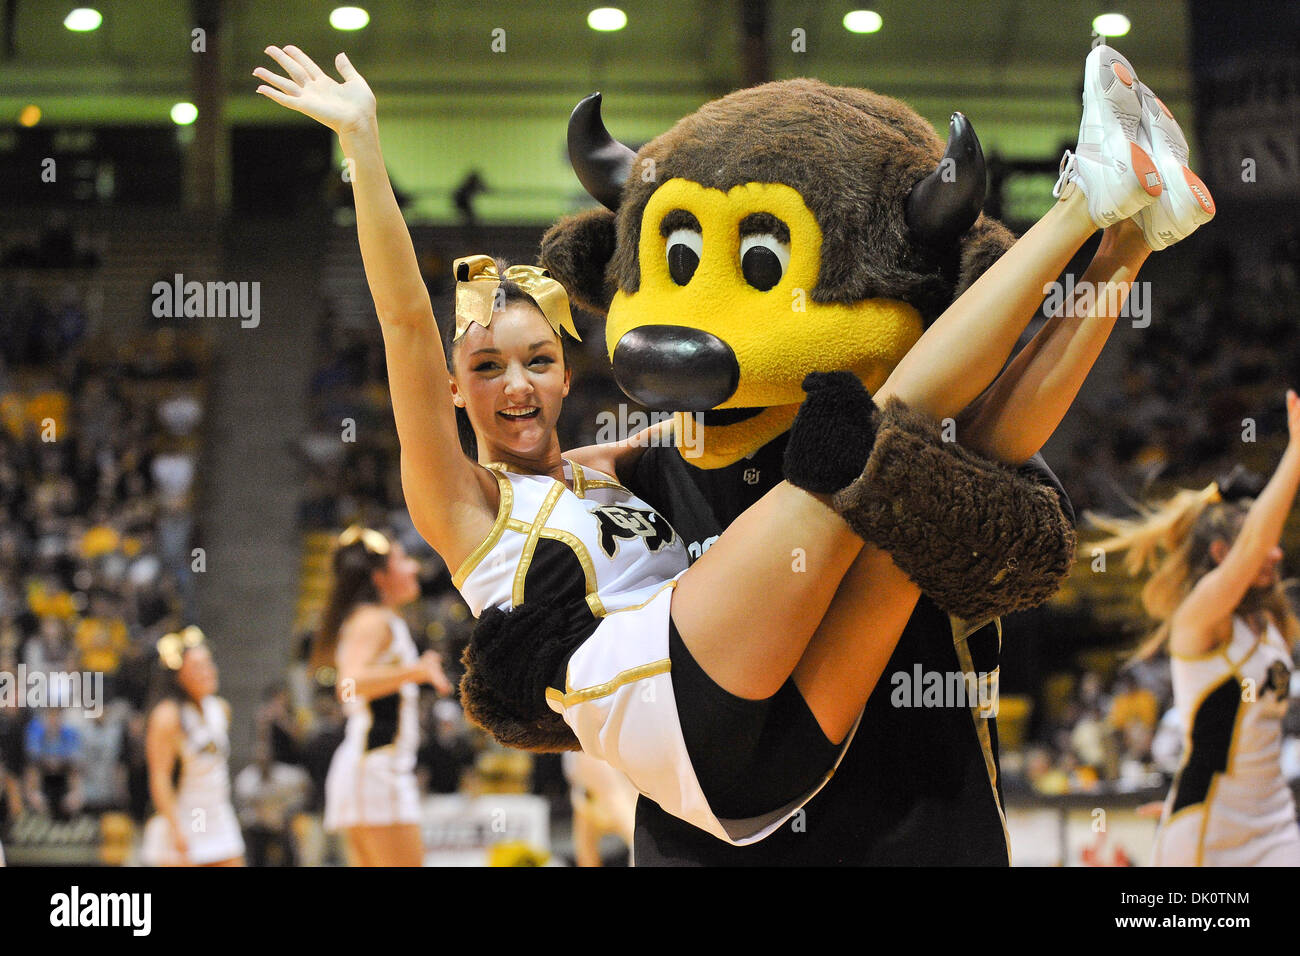 Jan. 8, 2011 - Boulder, Colorado, United States of America - CU Mascot CHIP carries a cheerleader off the floor. The Colorado Buffaloes defeated the #9 ranked Missouri Tigers by a score of 89 to 76 at the half at Coors Event Center. (Credit Image: © Andrew Fielding/Southcreek Global/ZUMAPRESS.com) Stock Photo